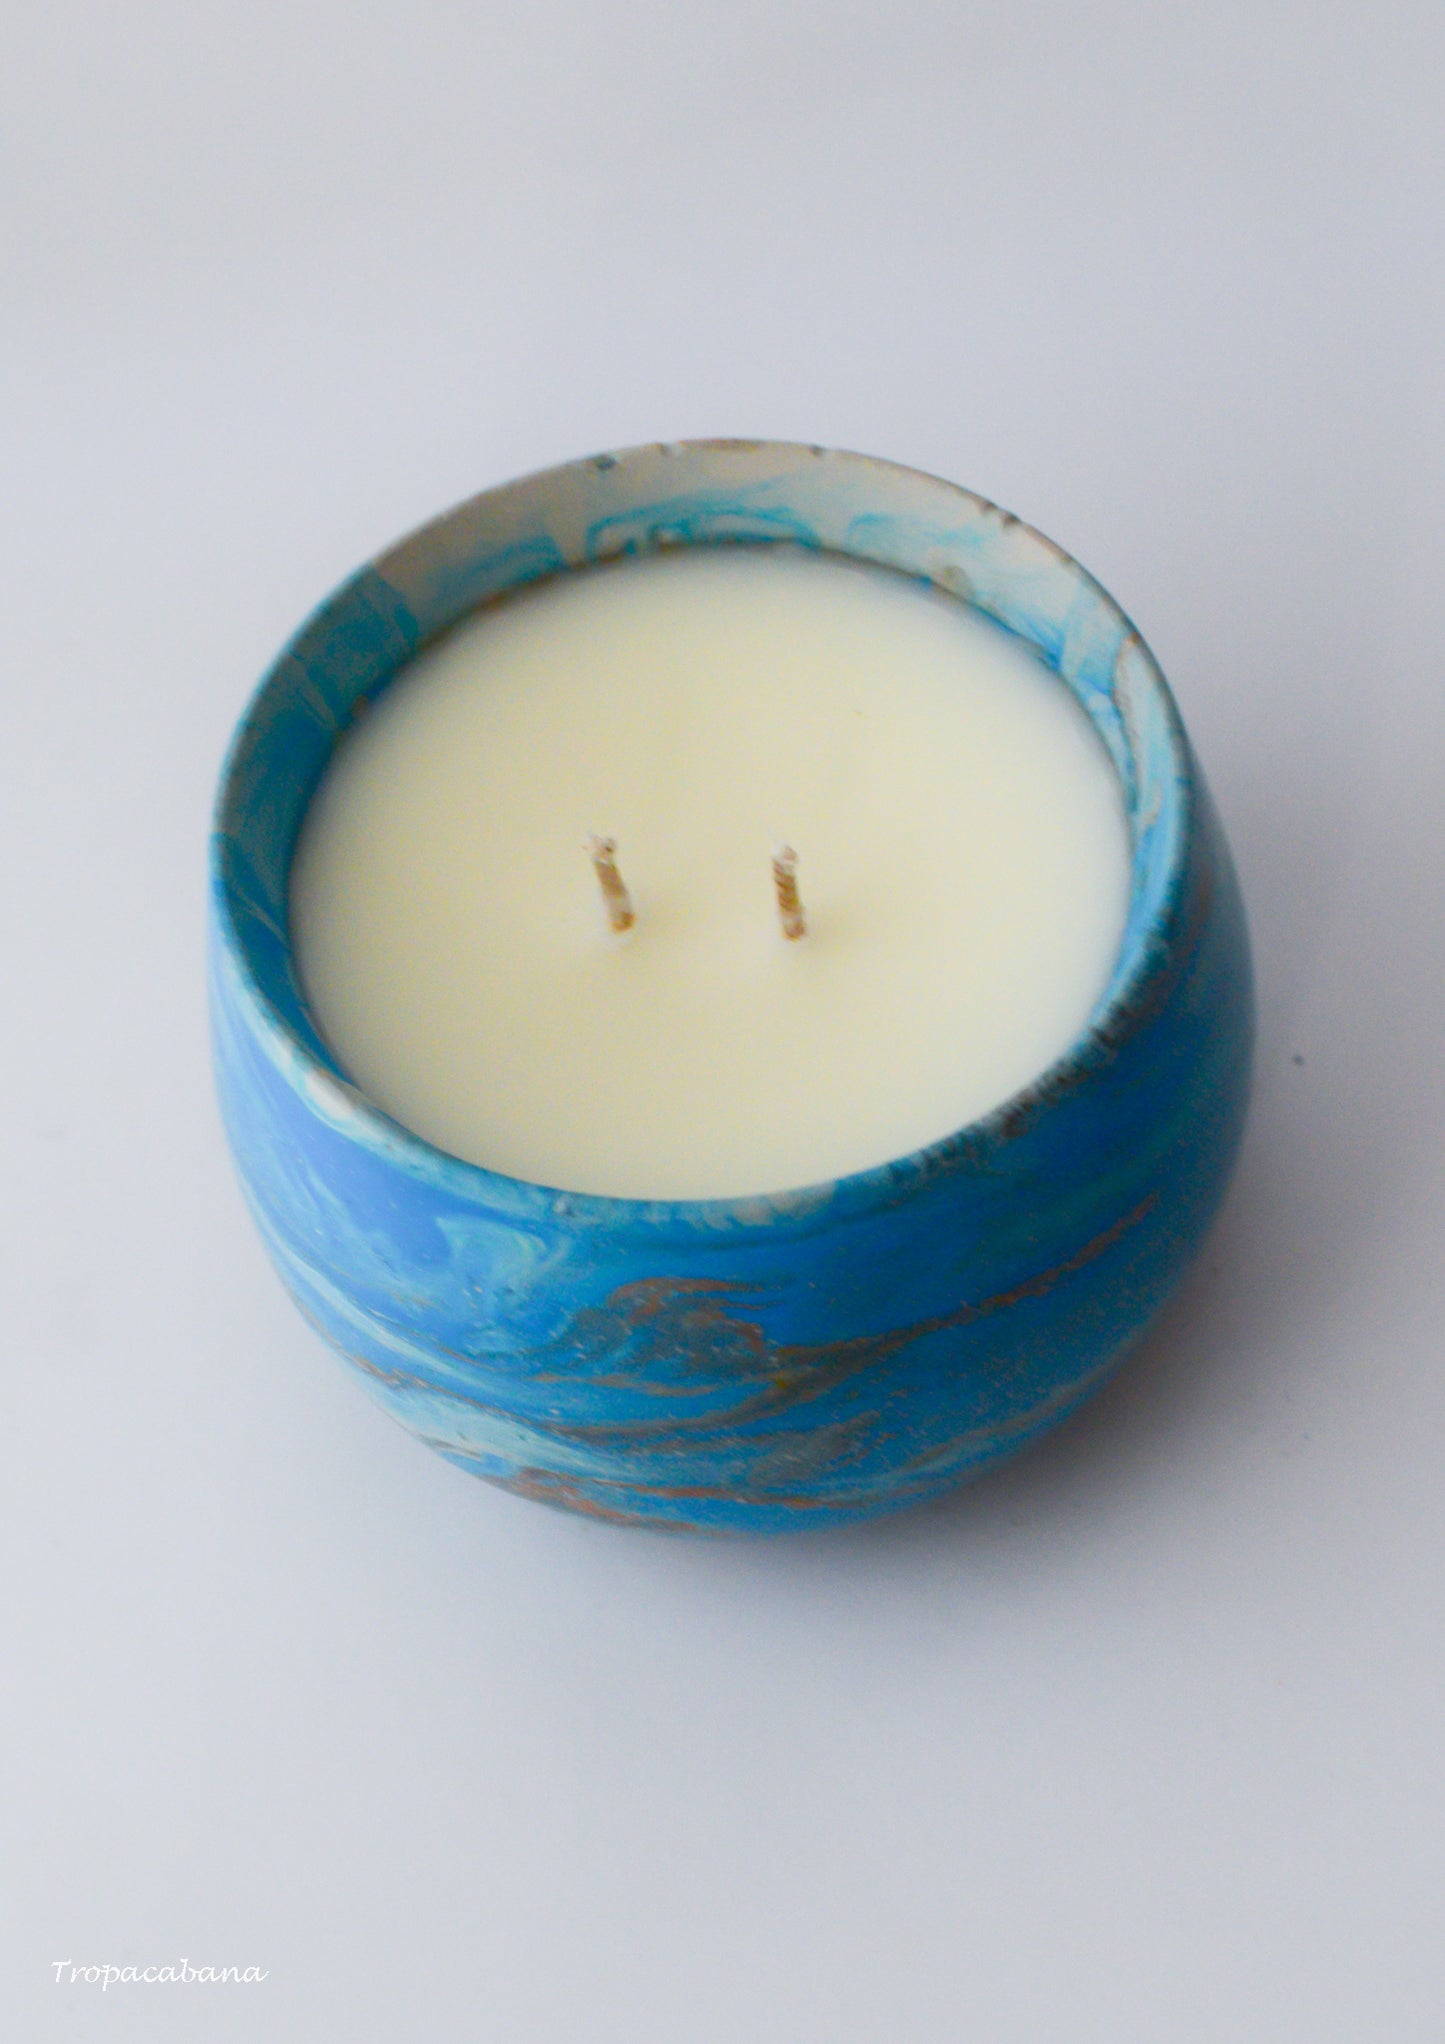 10 oz Handmade Concrete Aqua Dream Candle, in blue, aquamarine, ivory and copper tones, Vegan Candle, Luxury Candle, Coconut Wax Candle, Fragrance of the Ocean and Sand, TropaCabana, Inspired by the tropical beaches of Brazil